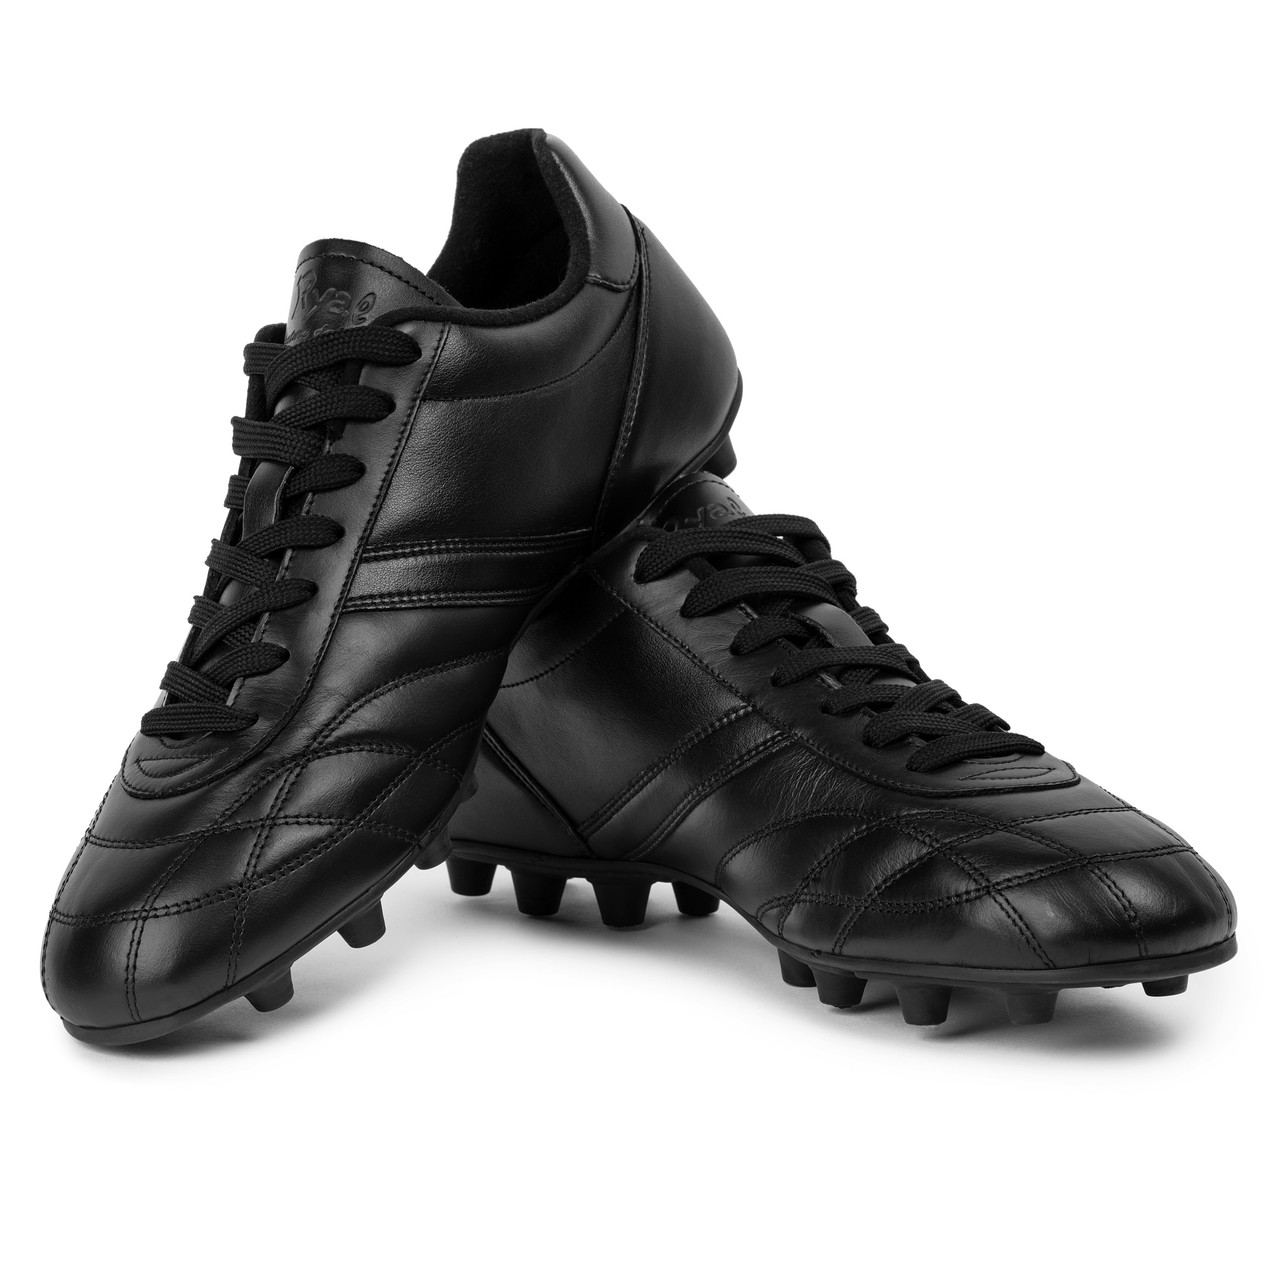 Black Referee Shoes | Handmade Cleats | The Referee Store